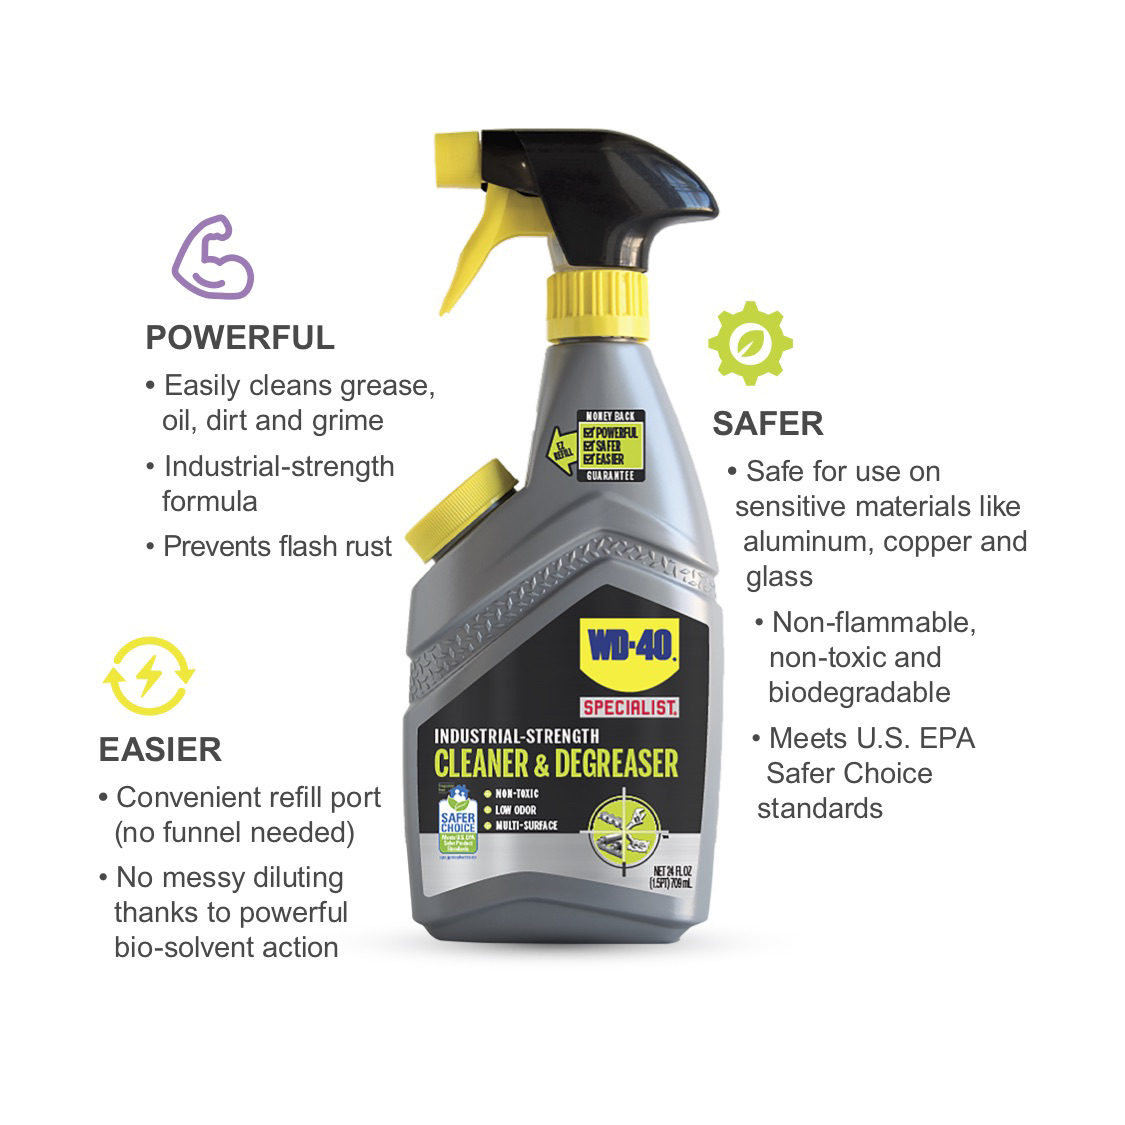 WD-40 Specialist Industrial-Strength Cleaner & Degreaser, 24 oz [Non-Aerosol Trigger] - image 5 of 6